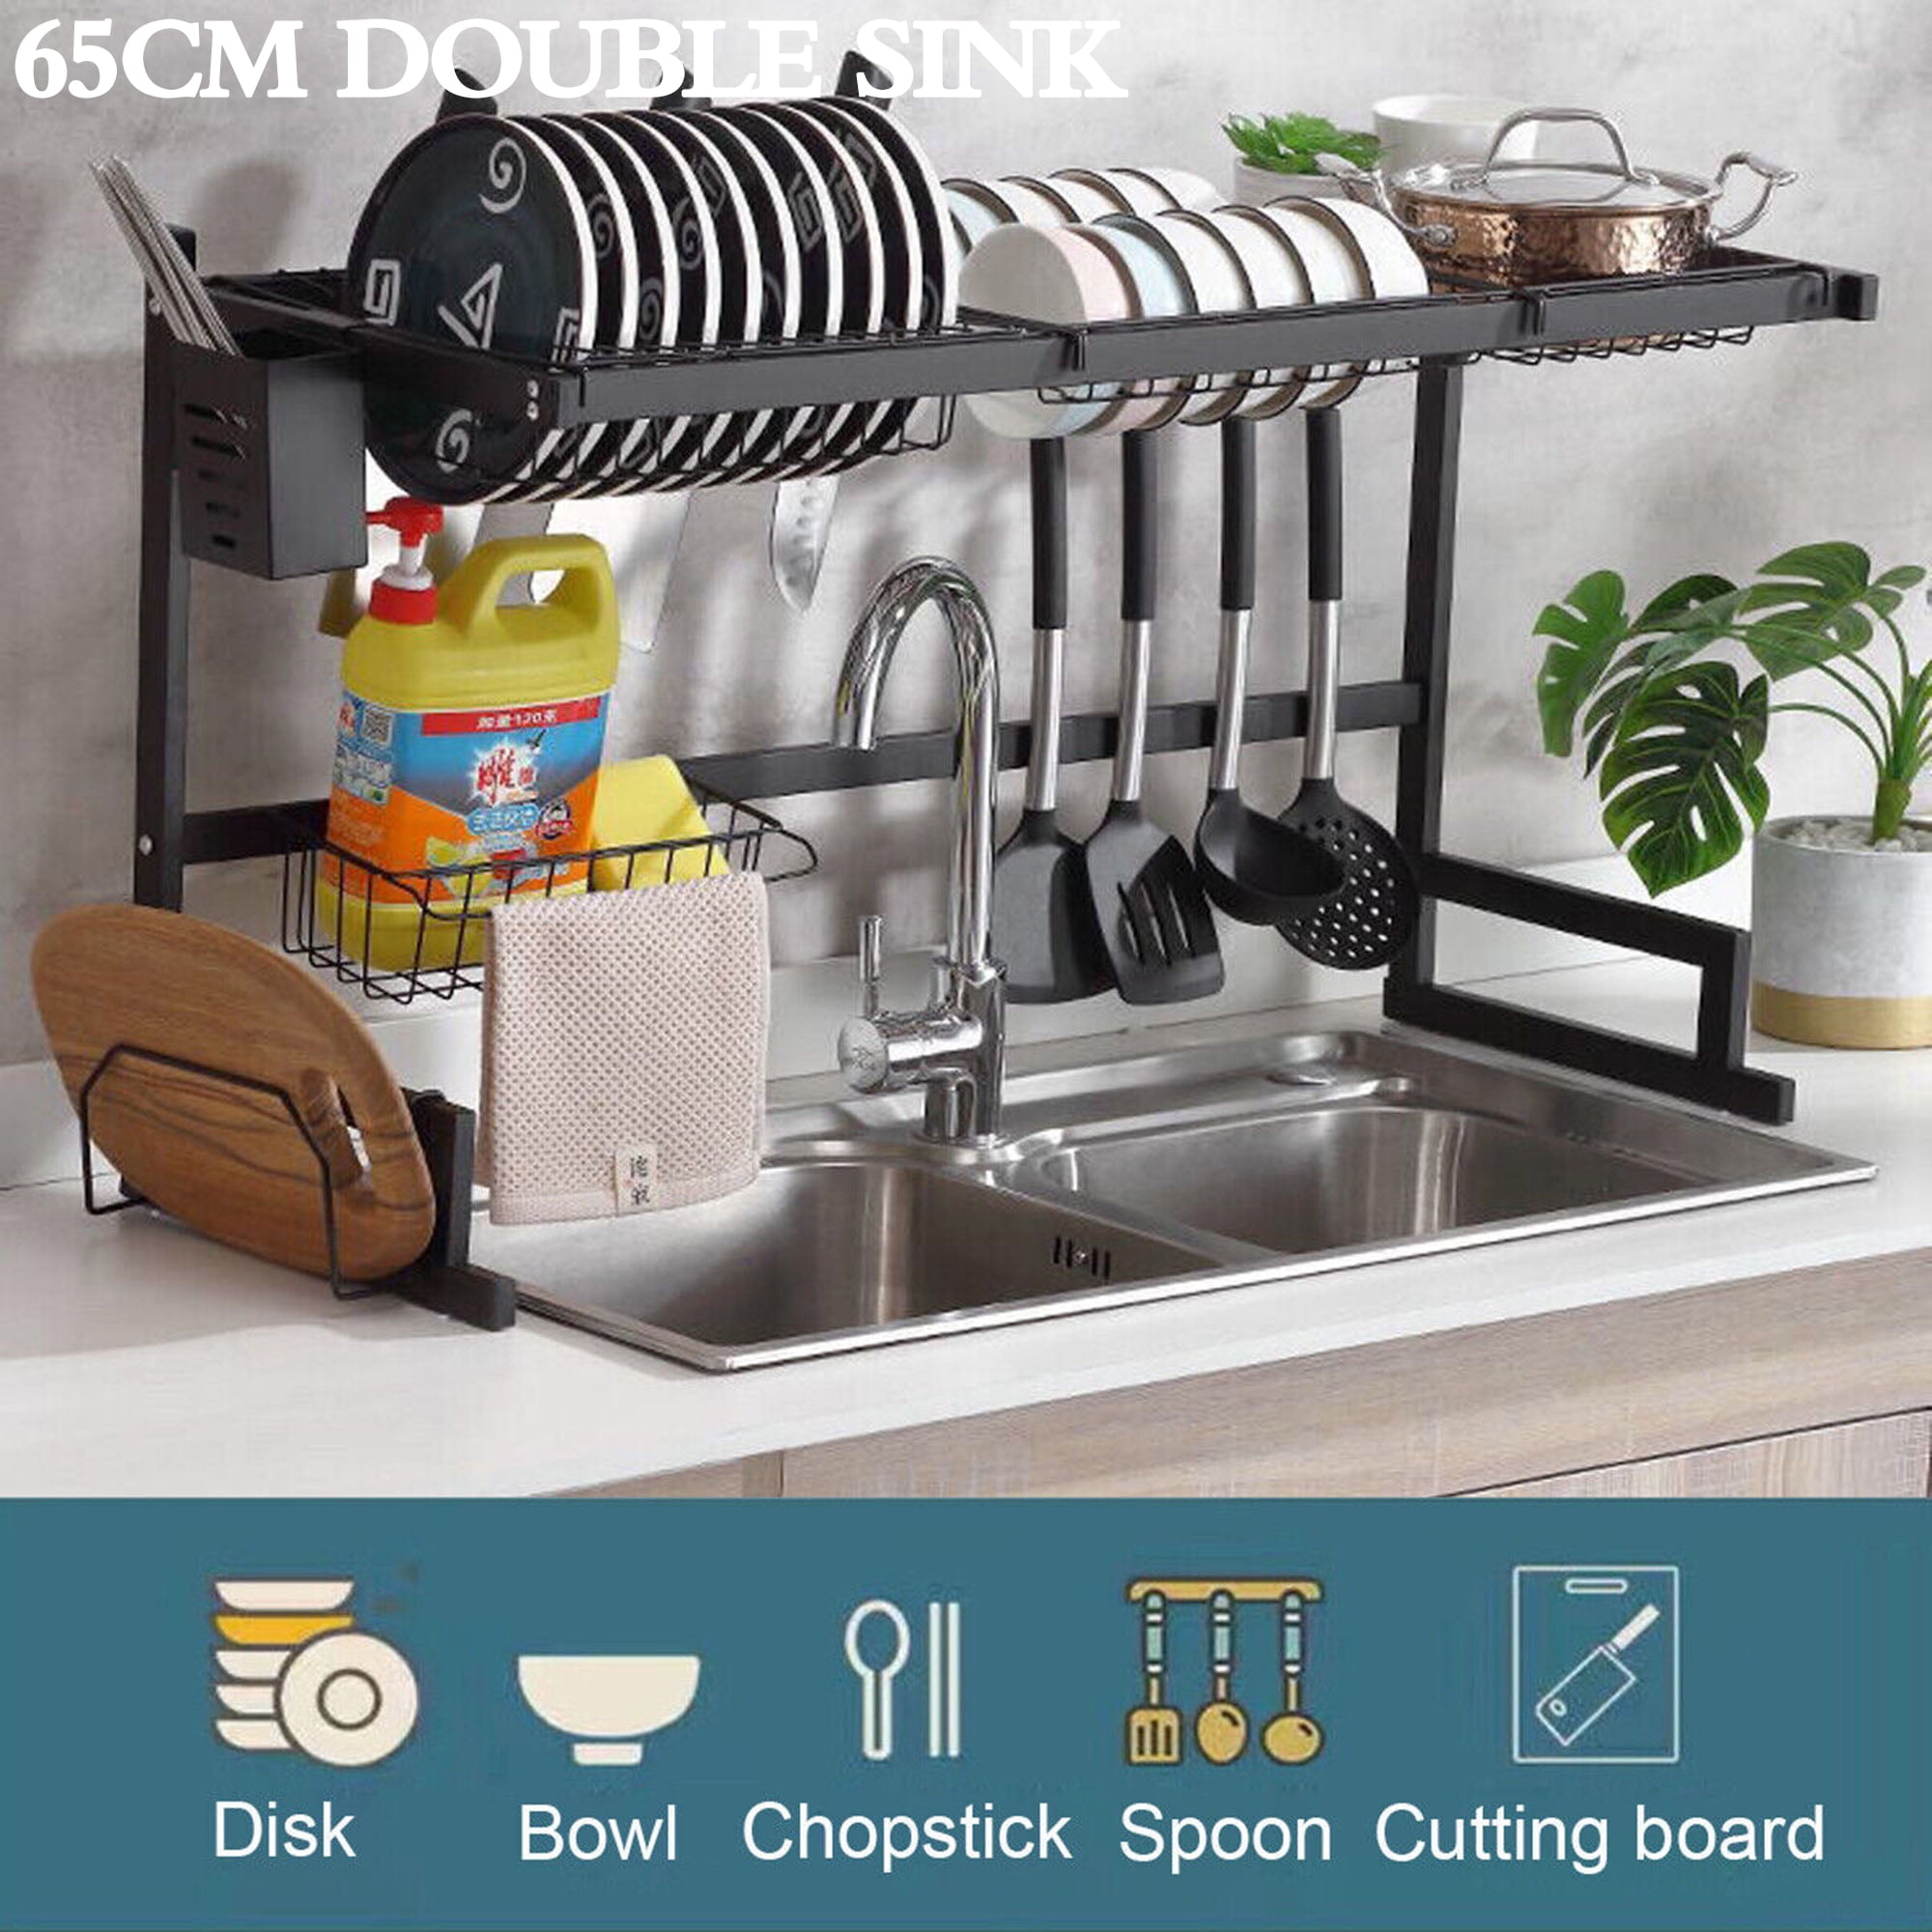 SHCKE 201 Stainless Steel Over Sink Dish Drying Rack Save More Counter  Space To Hold Dishes,Plates,Bowls,Dish Drainer Rack Single Groove Double  layer 